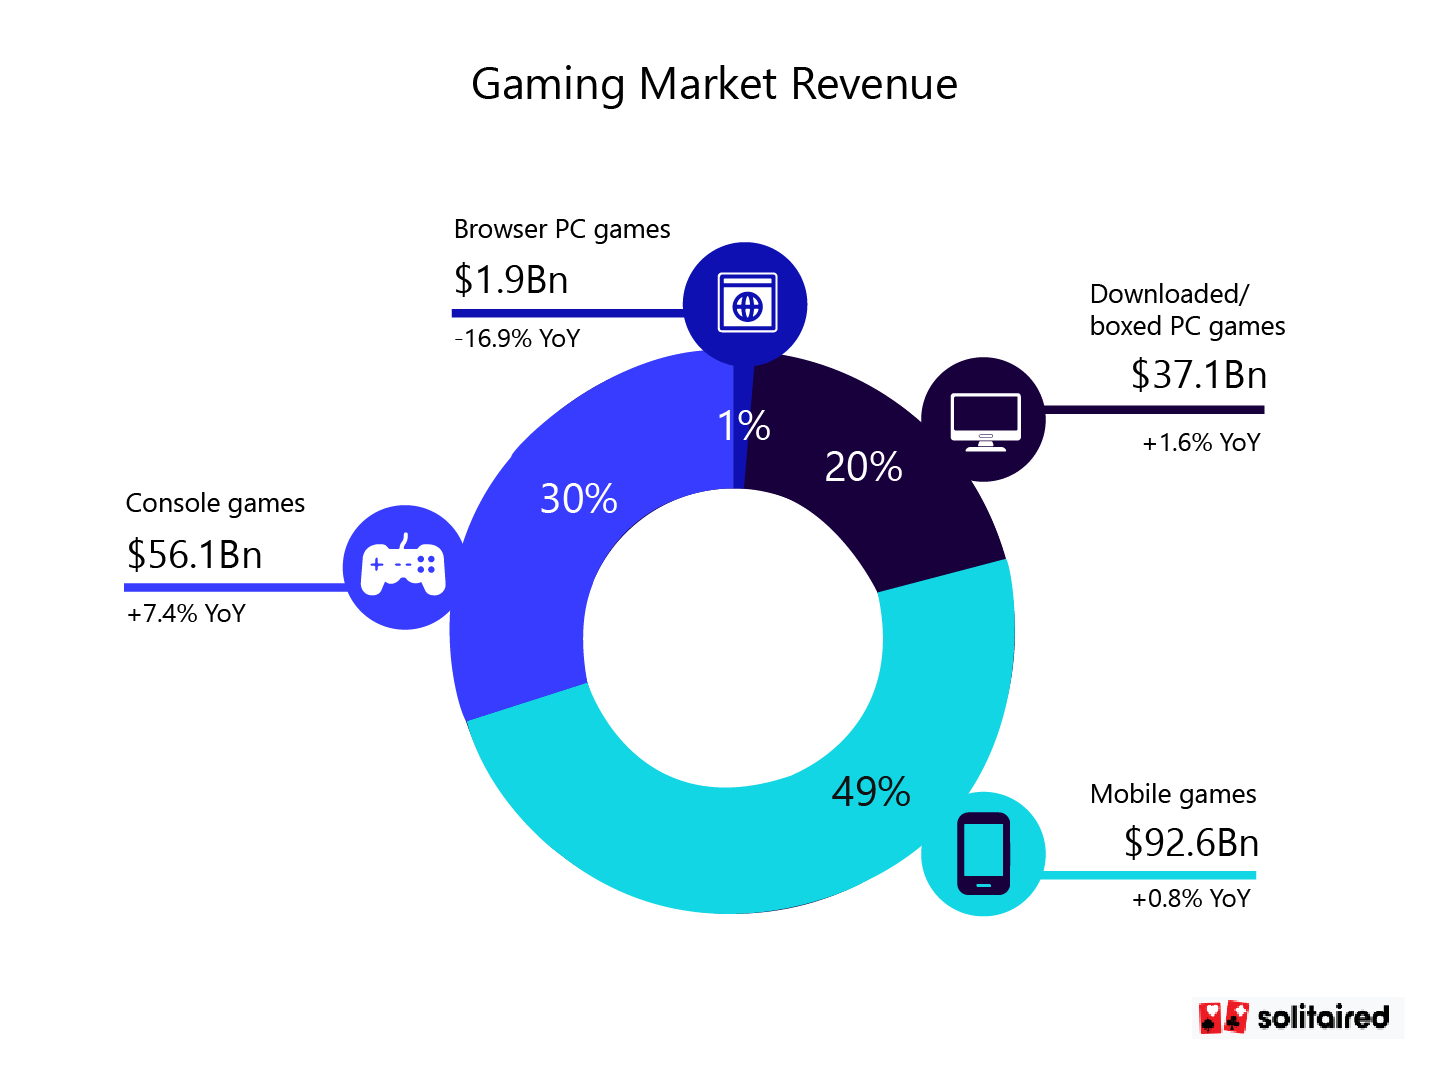 Gaming market revenue by device type